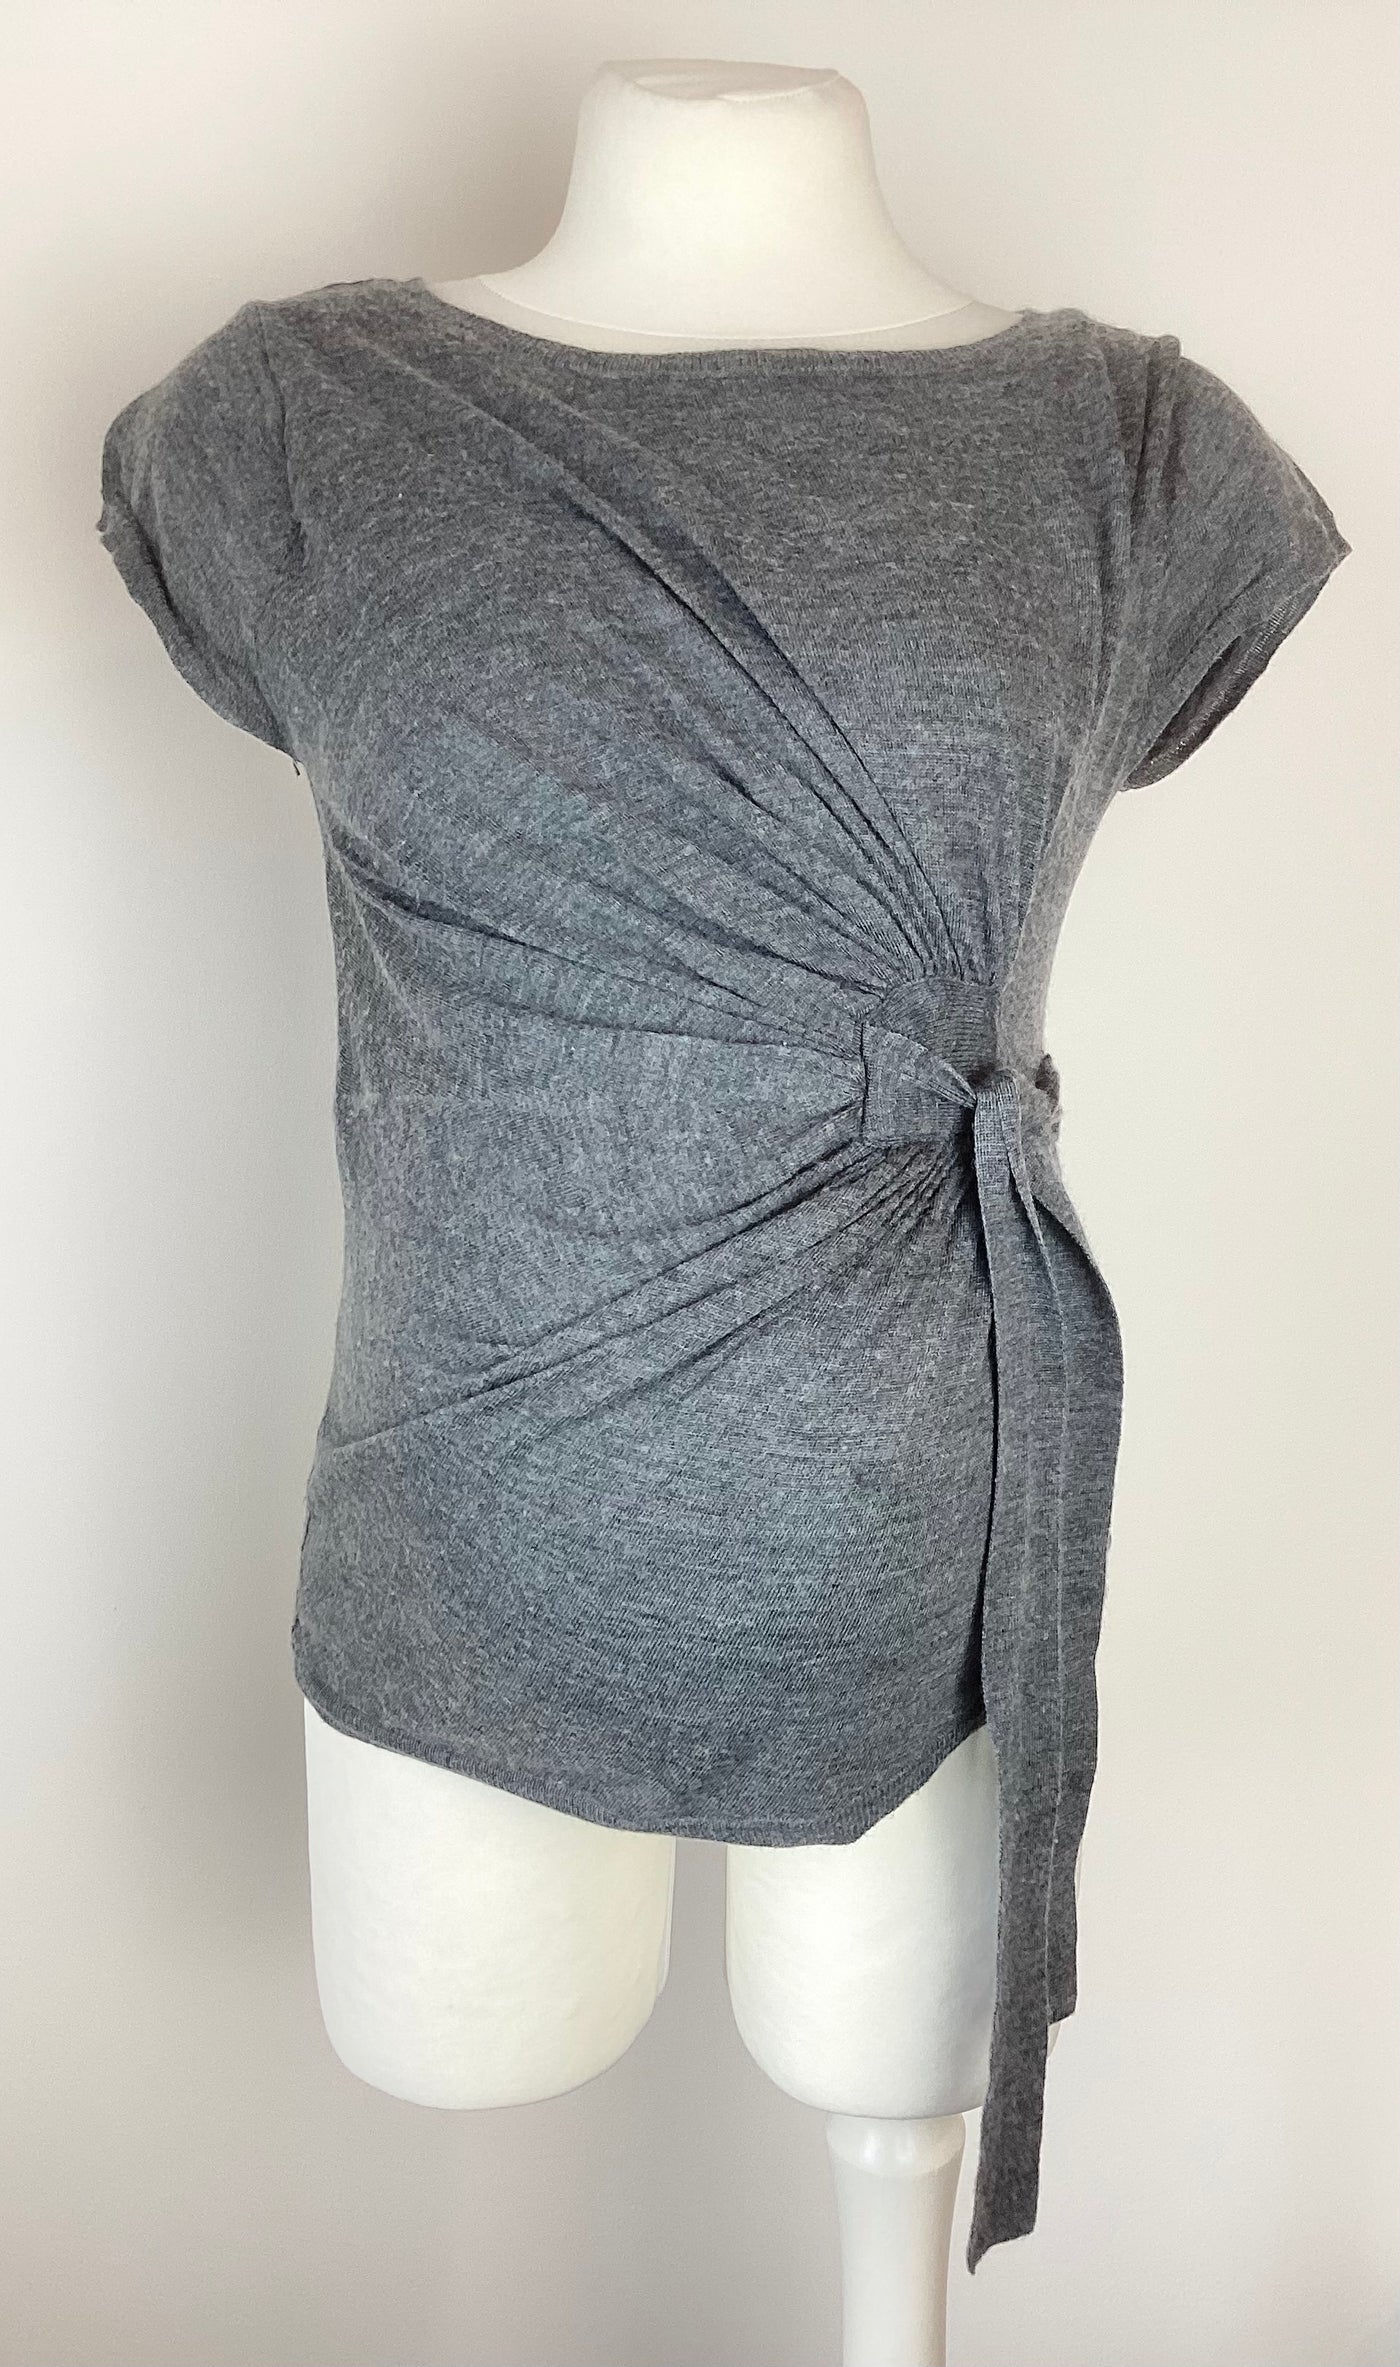 Phase Eight grey knit short sleeved top with side tie - Size 12 (would better fit size 10)